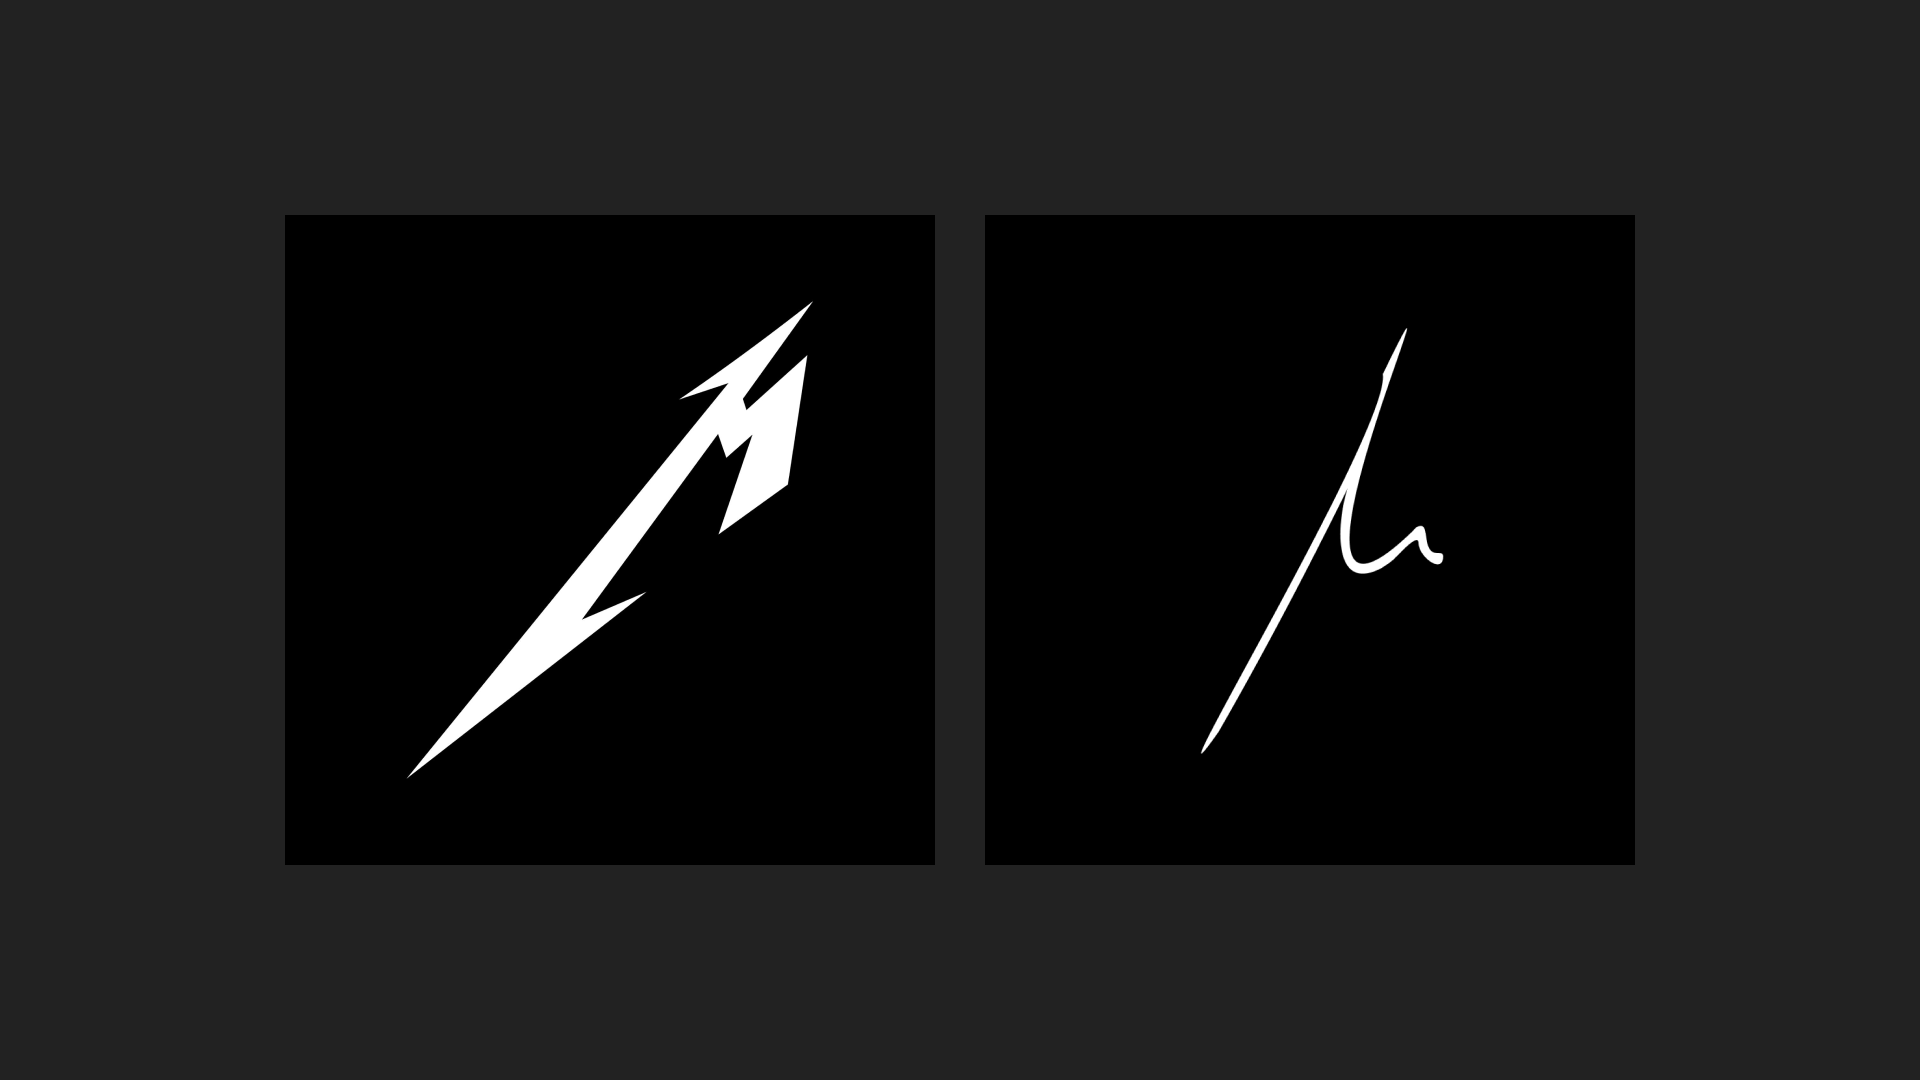 Left: Metallica "M" logo. Right: Author's signature logo. (I vividly remember, at 10 or 12 years old, my first solo visit to the record store and picking Metallica's Reload.)